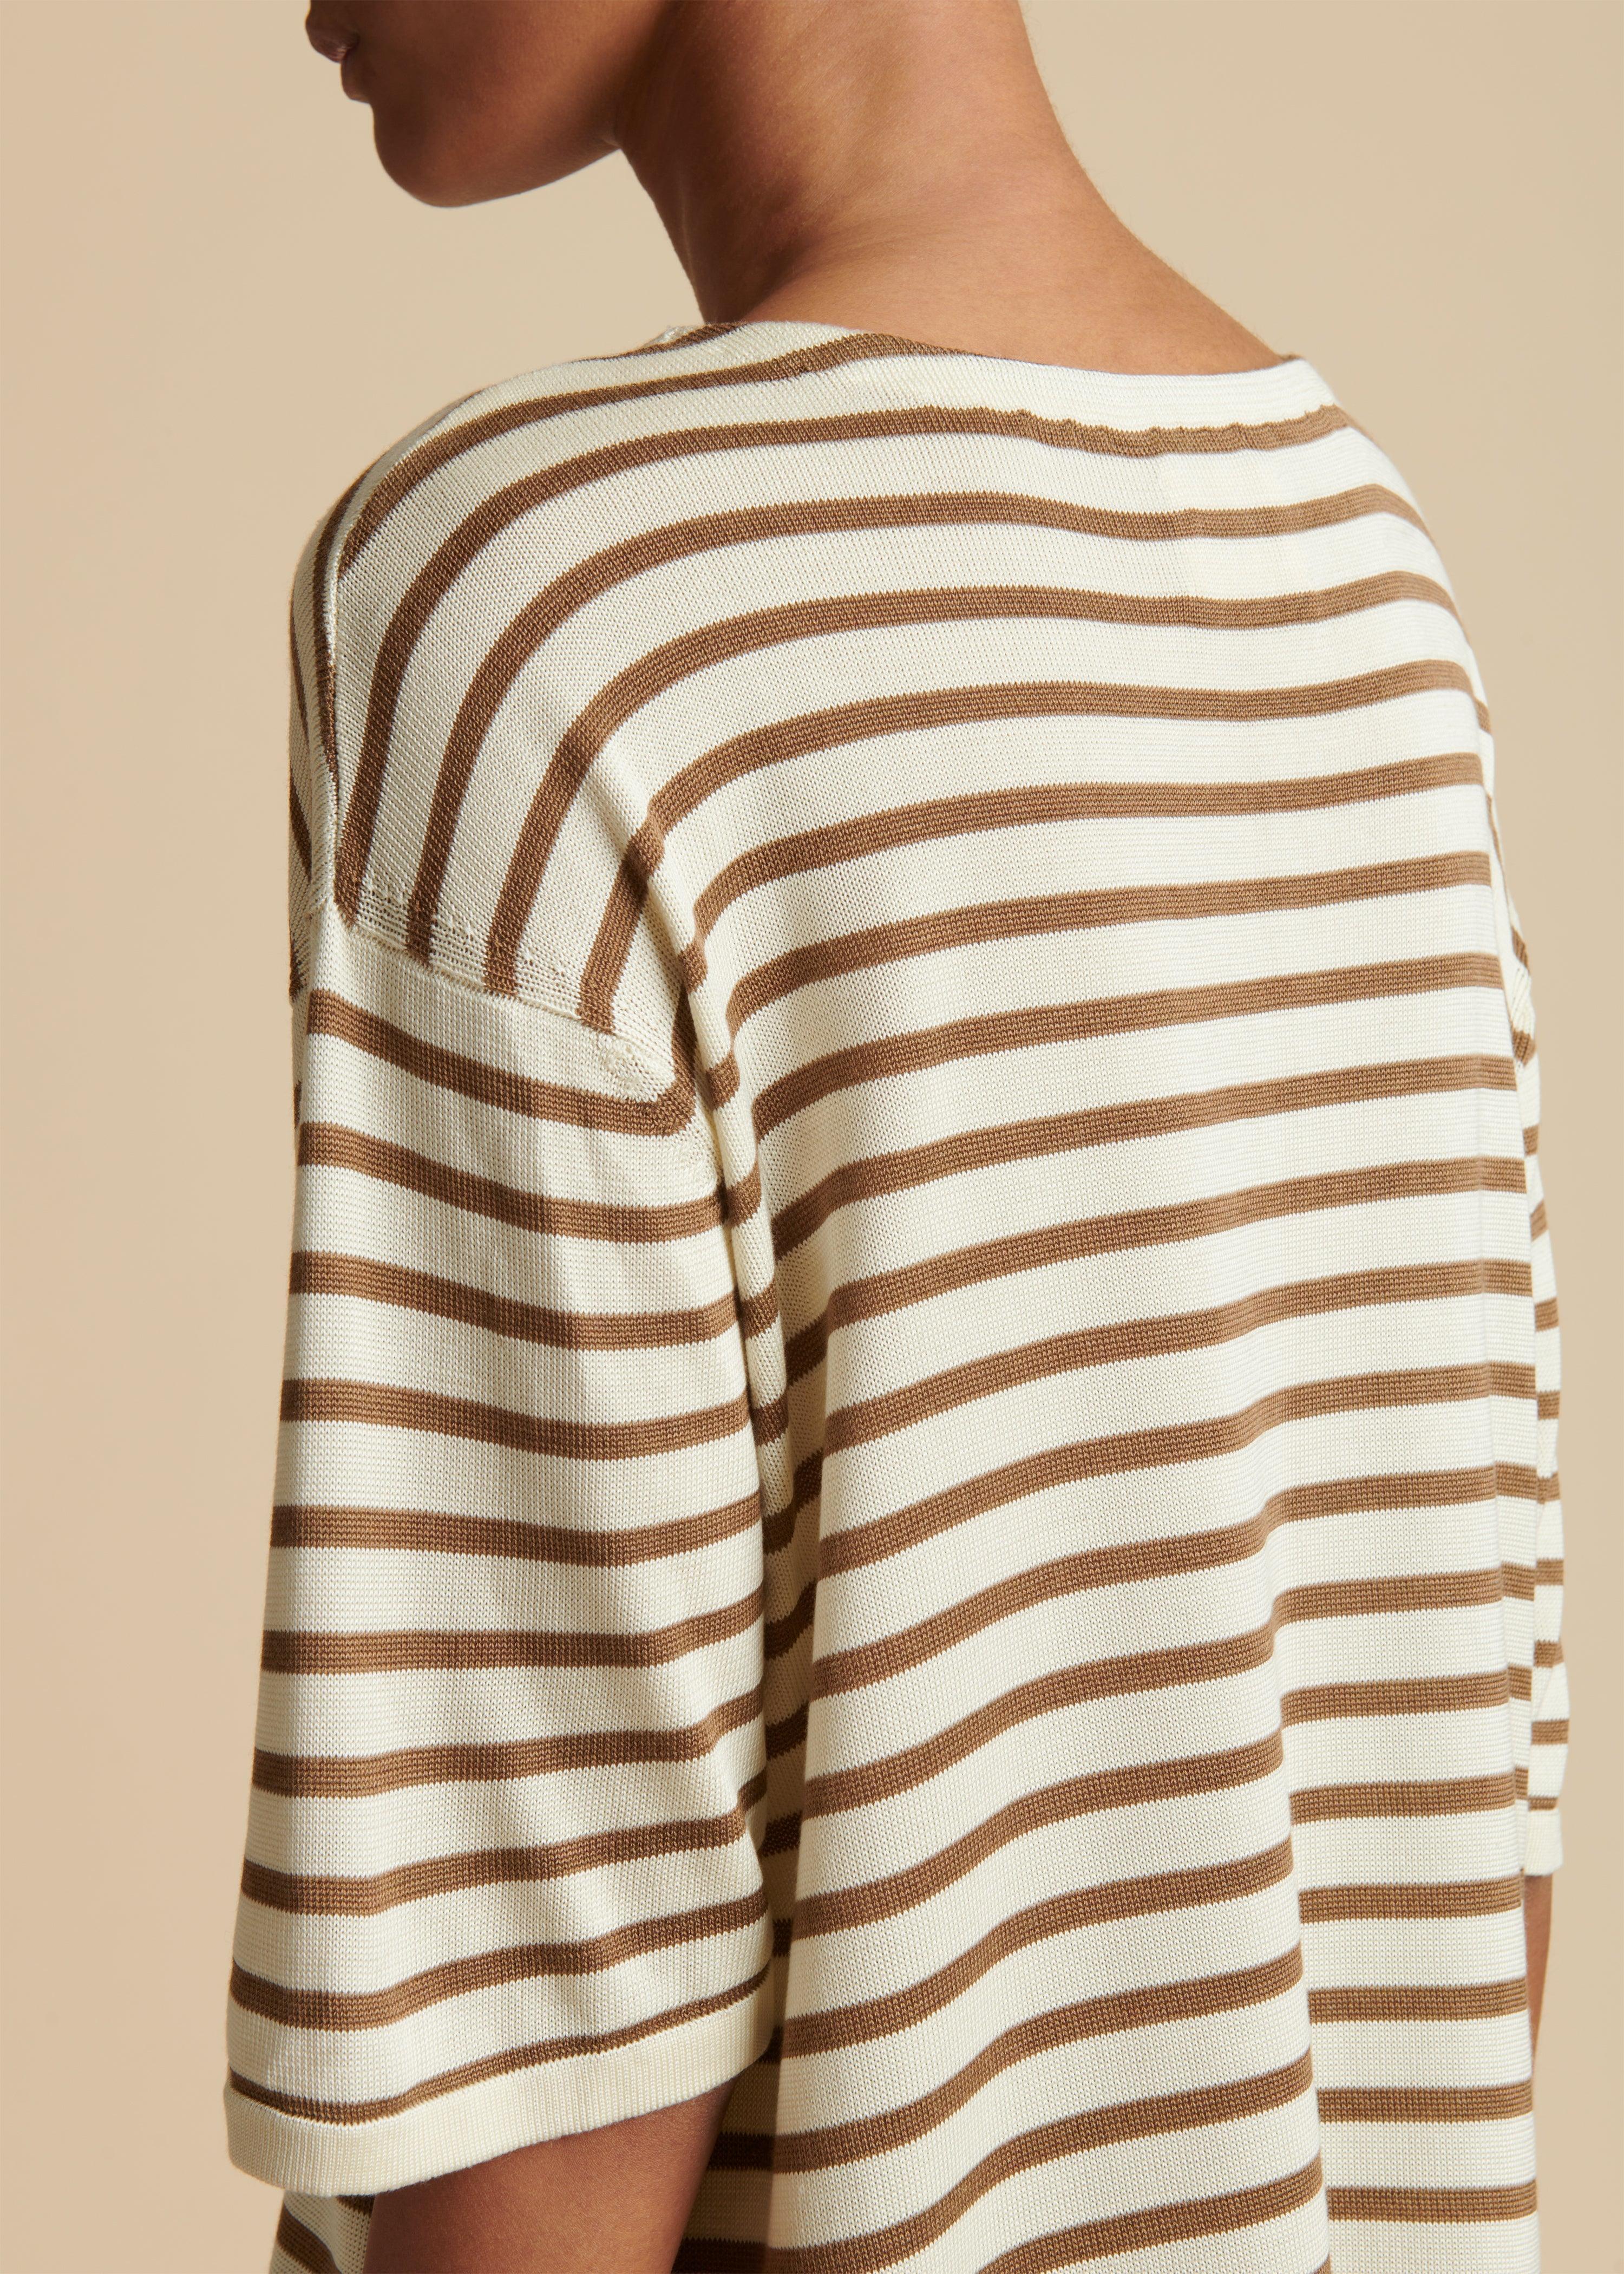 The Brandy Sweater in Ivory and Antelope Stripe - The Iconic Issue